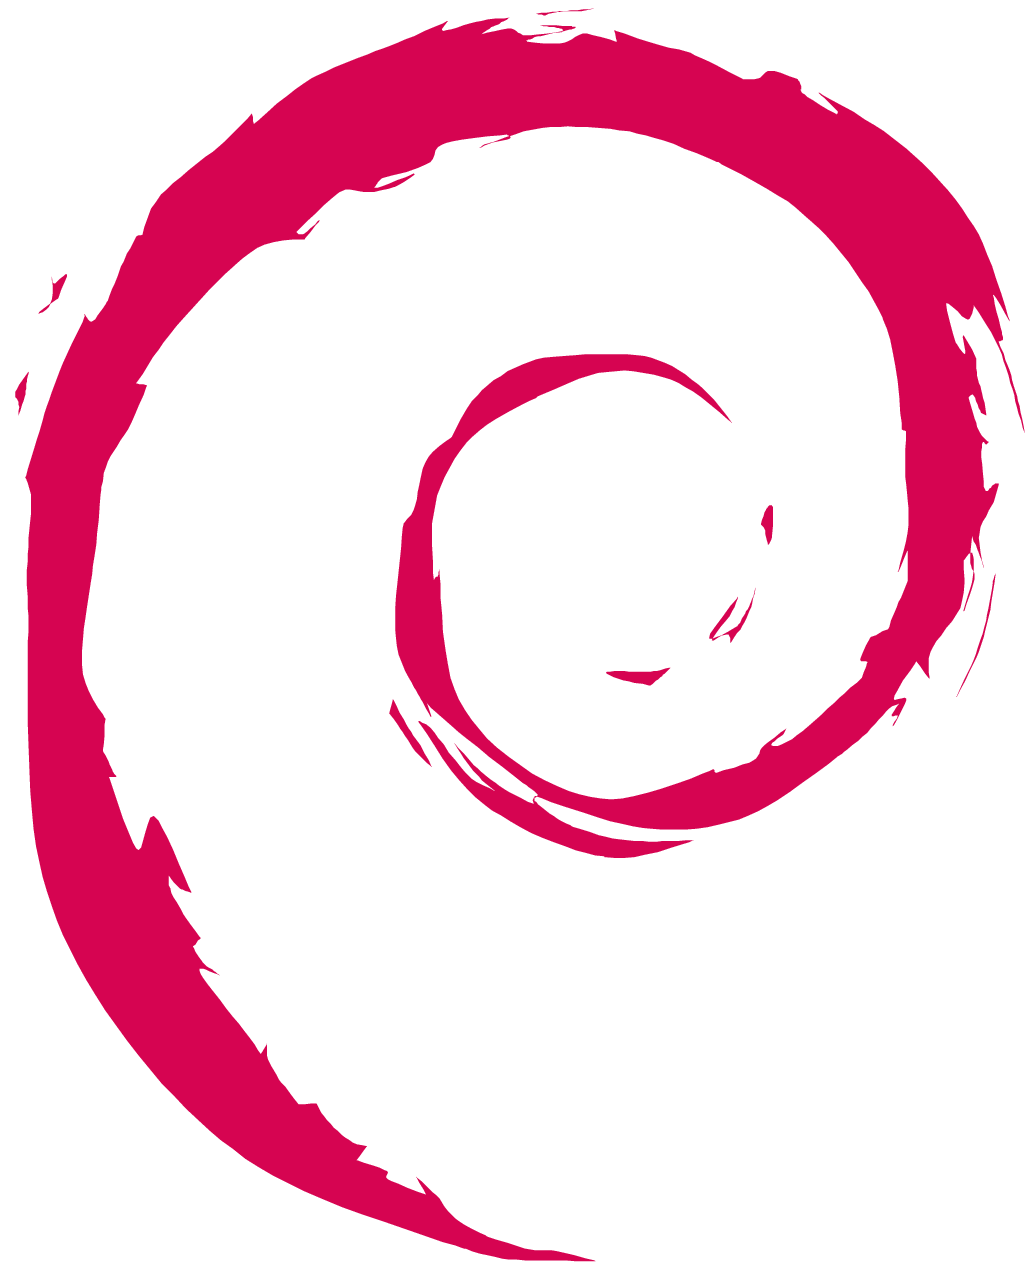 Red and White Swirl Logo - Red Swirl Background | Free Backgrounds for Facebook, Google+ ...